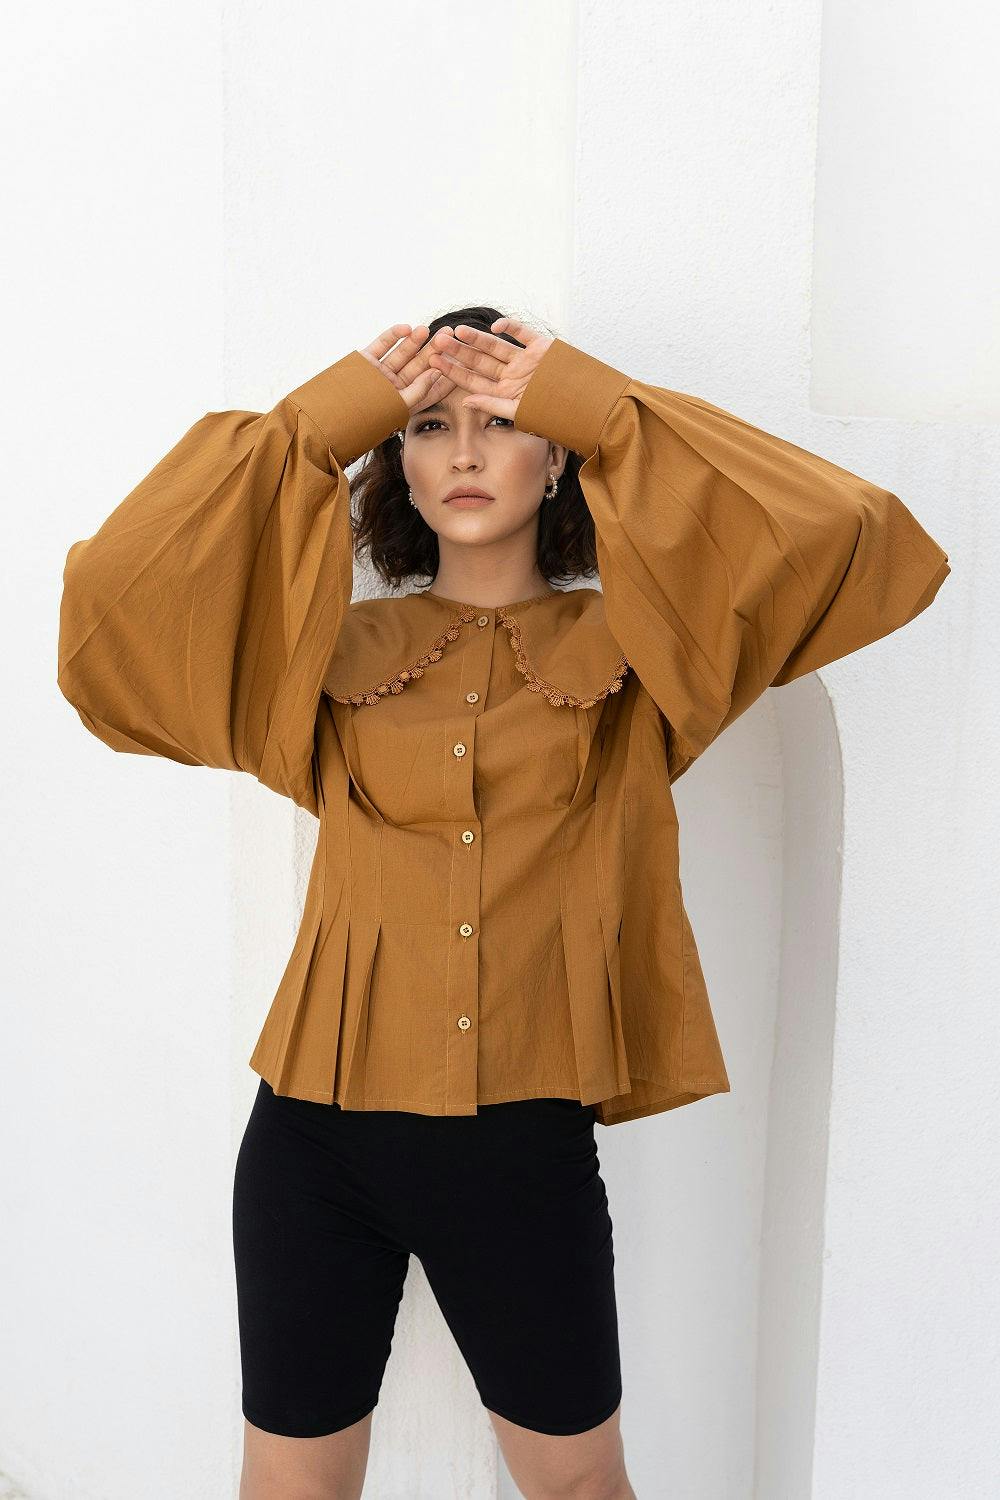 CARRIE Biscuit Brown Shirt, a product by Nidzign